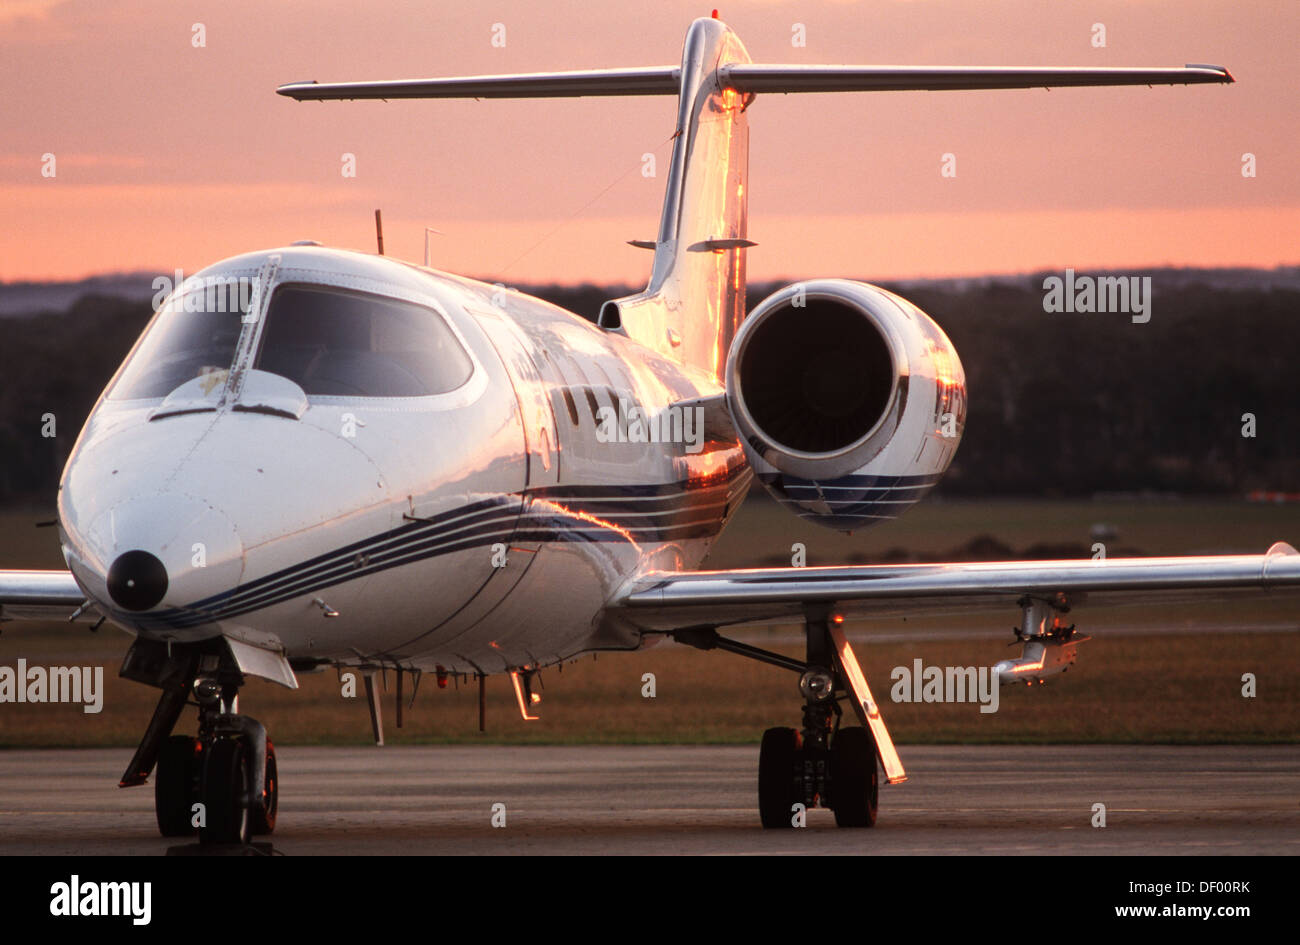 Learjet parked on airport apron Stock Photo